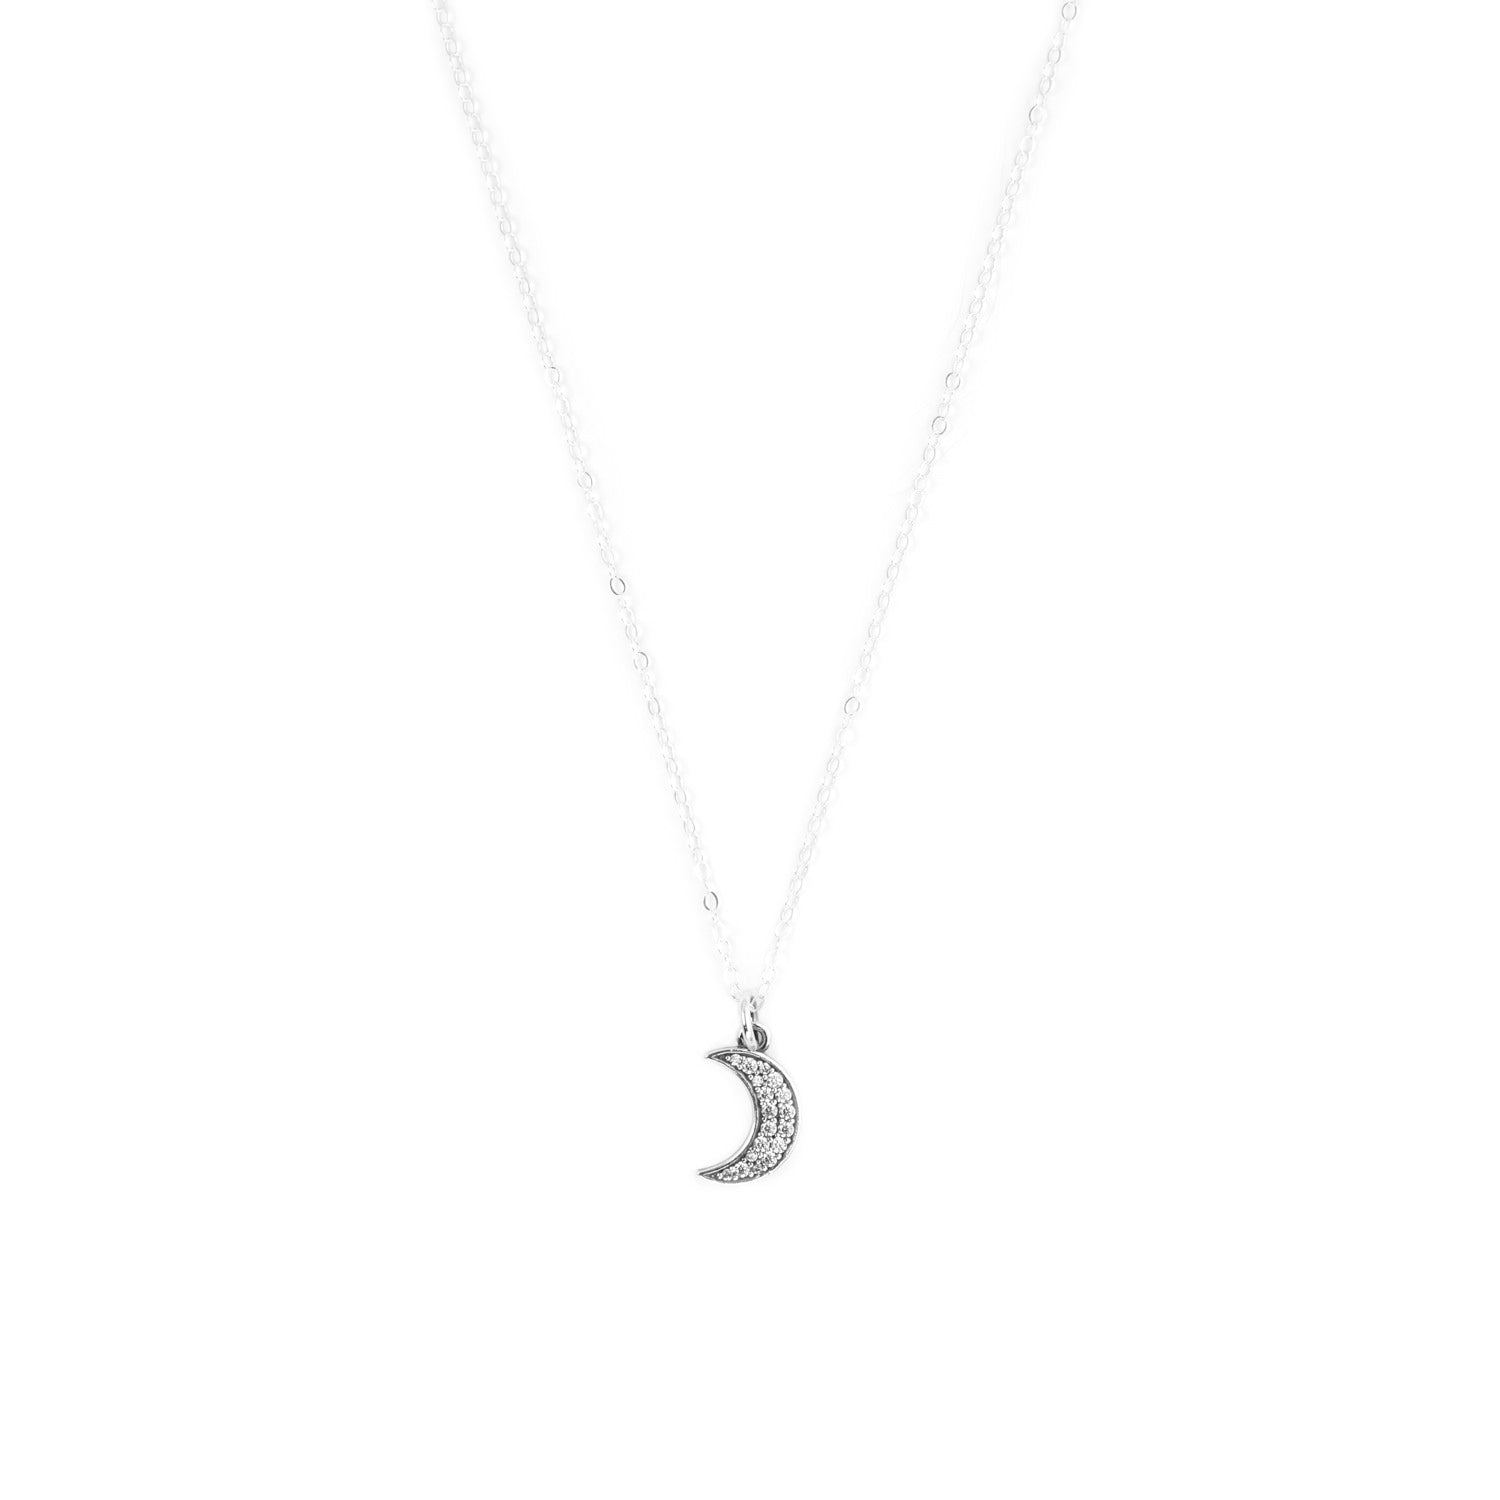 MOON PHASE PROTECTION PENDANT